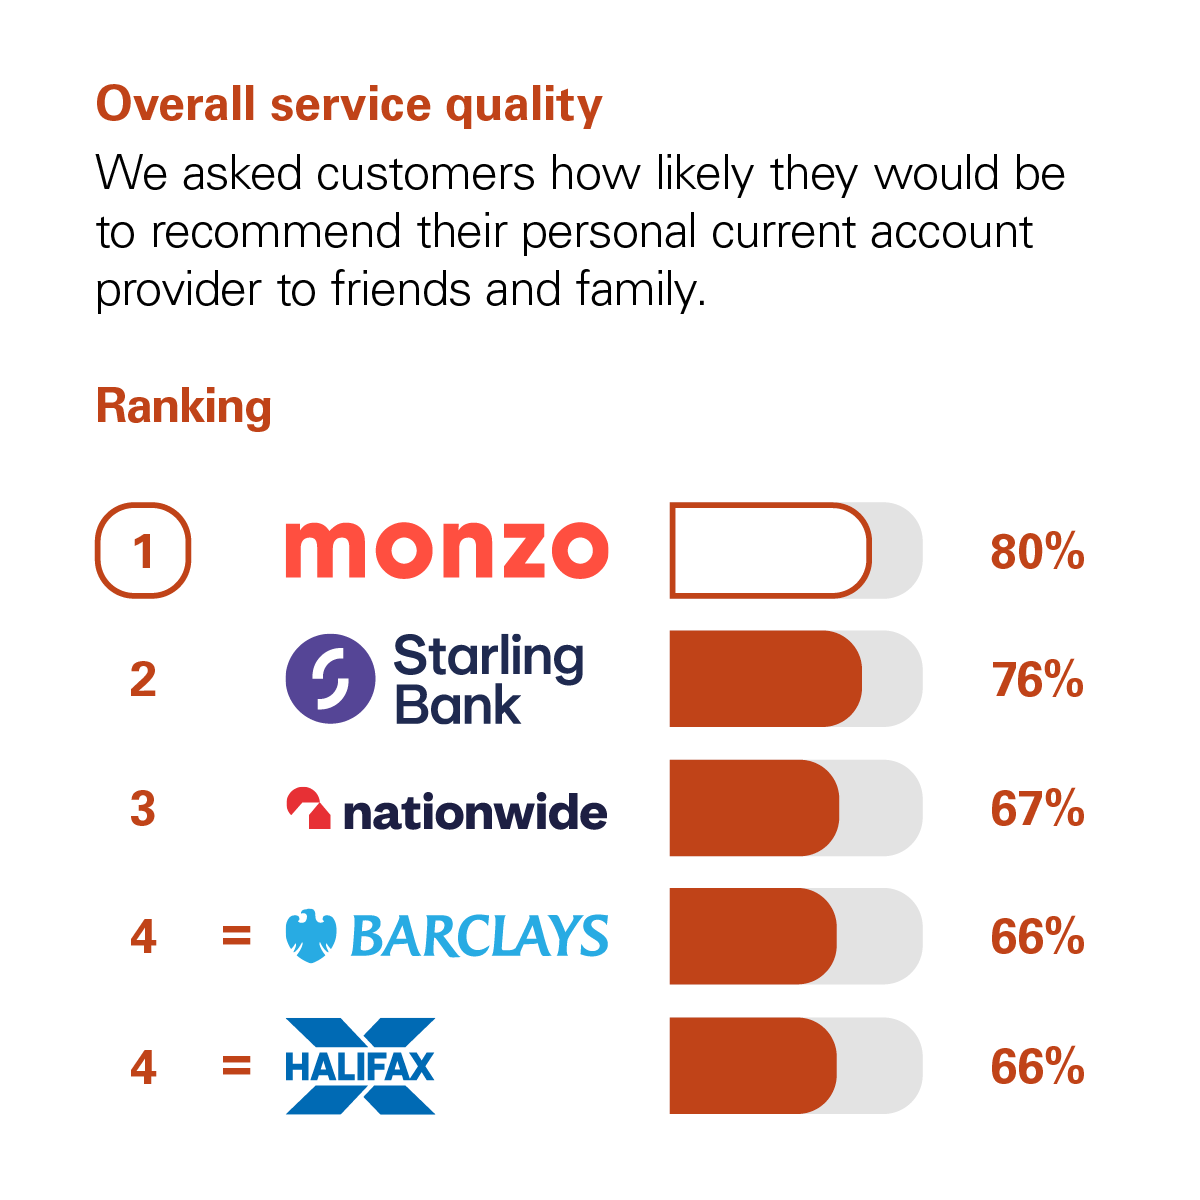 Graph showing the results of the CMA scoring of UK banks in the Overall Service Quality category. The CMA asked customers how likely they would be to recommend their personal current account provider to friends and family. The rankings with percentage scores are: 1st Monzo with 80%. 2nd Starling Bank with 76%. 3rd Nationwide with 67%. Joint 4th Barclays and Halifax with 66%.